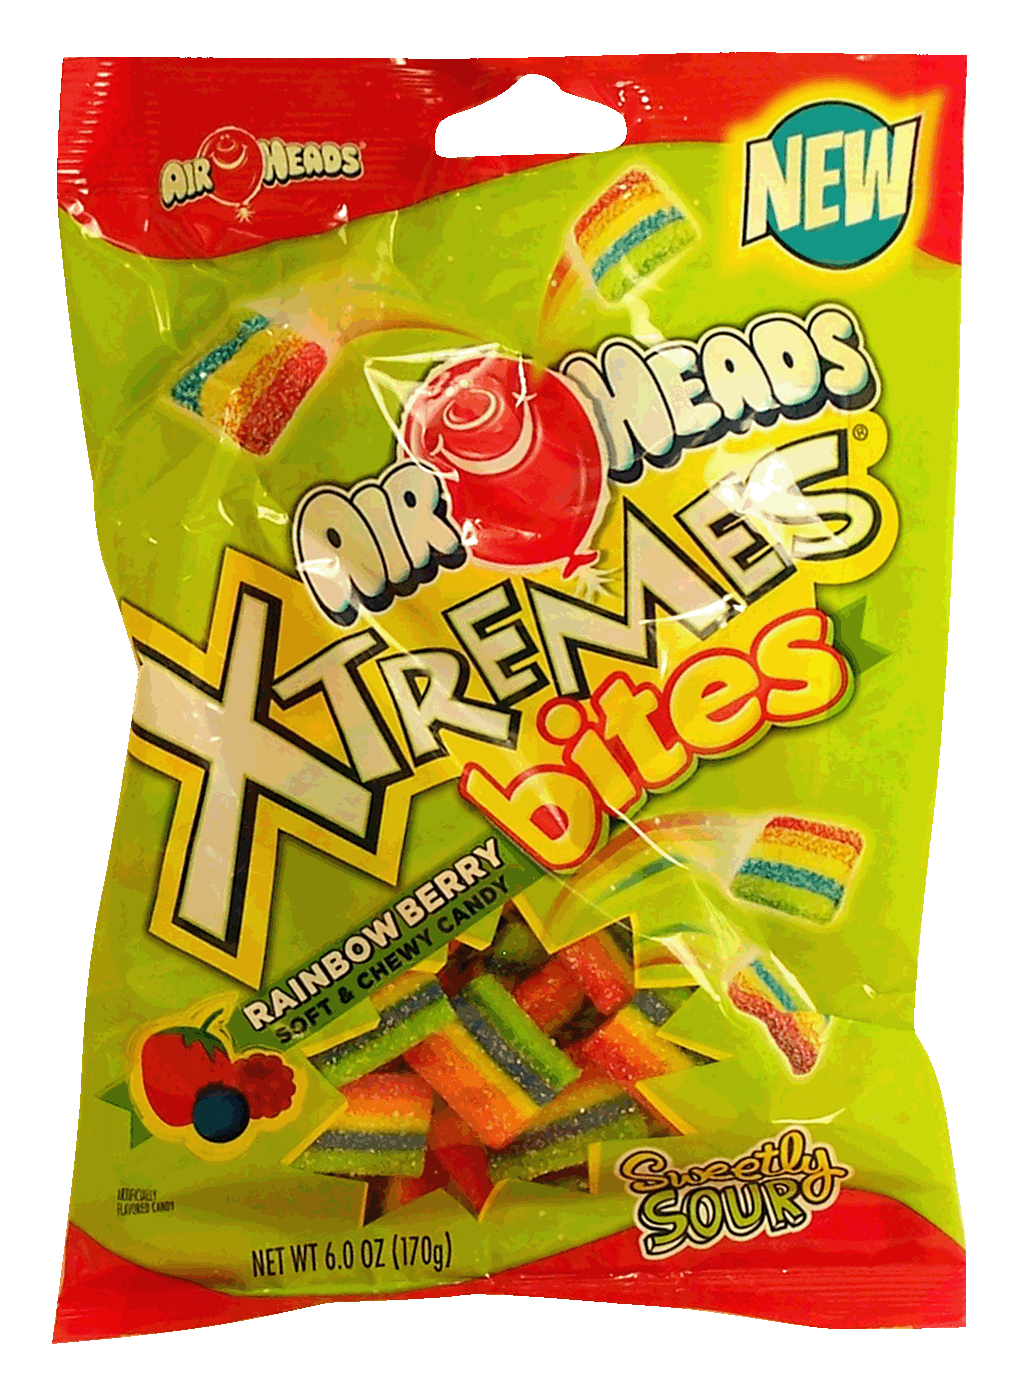 Air Heads Xtremes bites; rainbow berry soft & chewy candy, sweet & sour Full-Size Picture